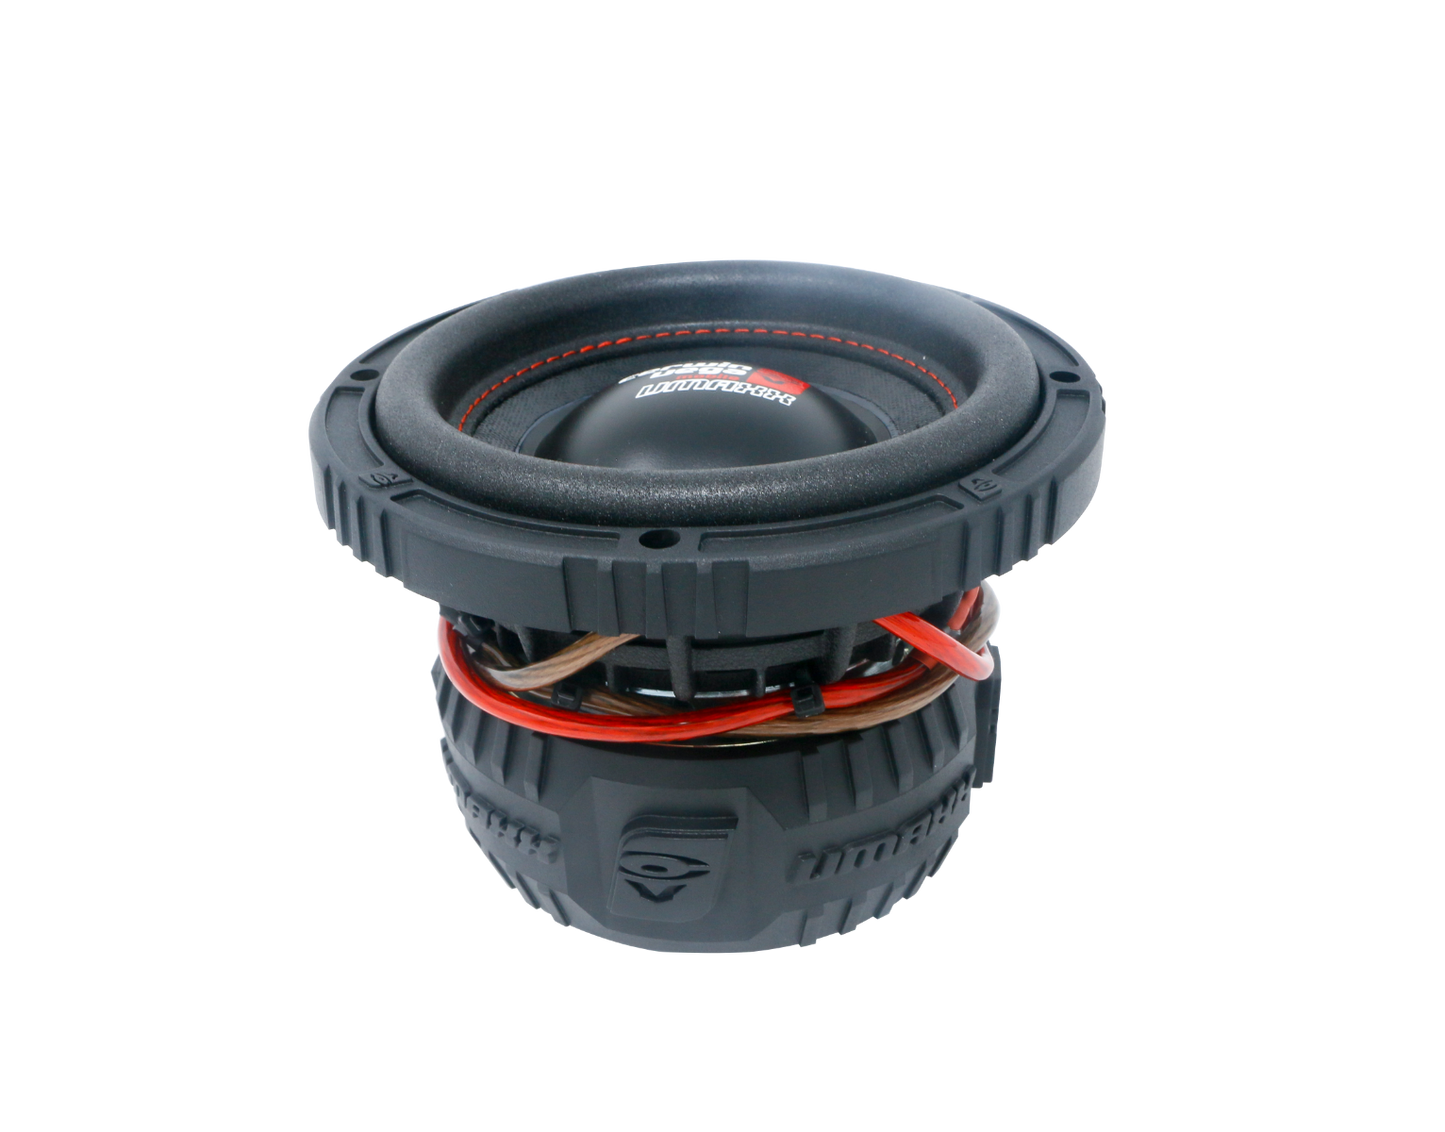 6.5 Inch High Performance Car Audio Subwoofer